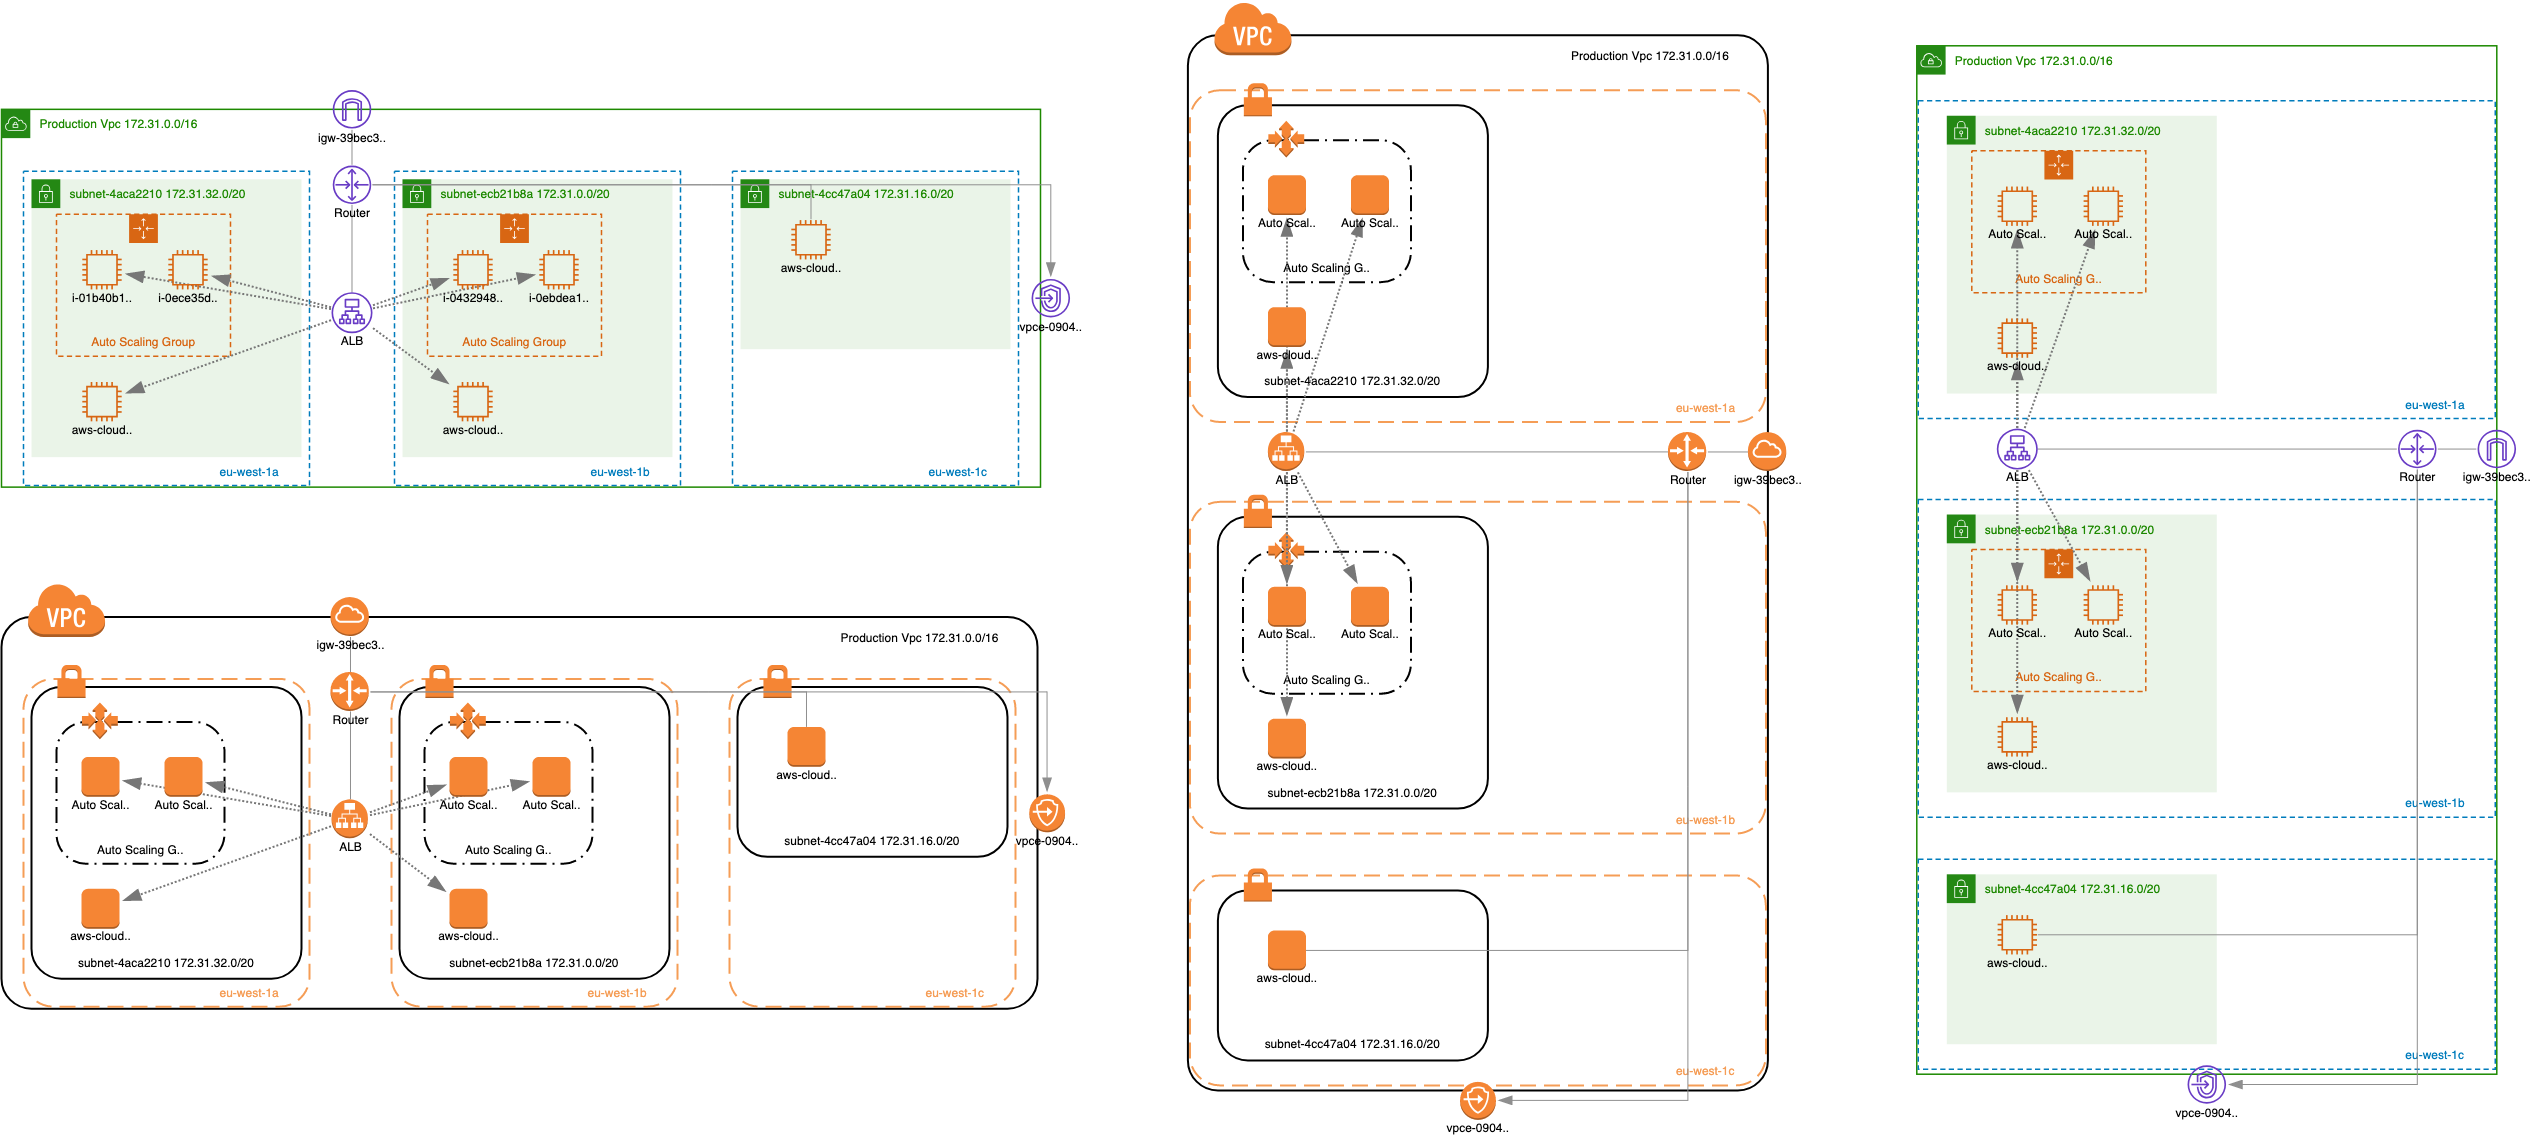 Auto generated diagrams using old and new AWS icons